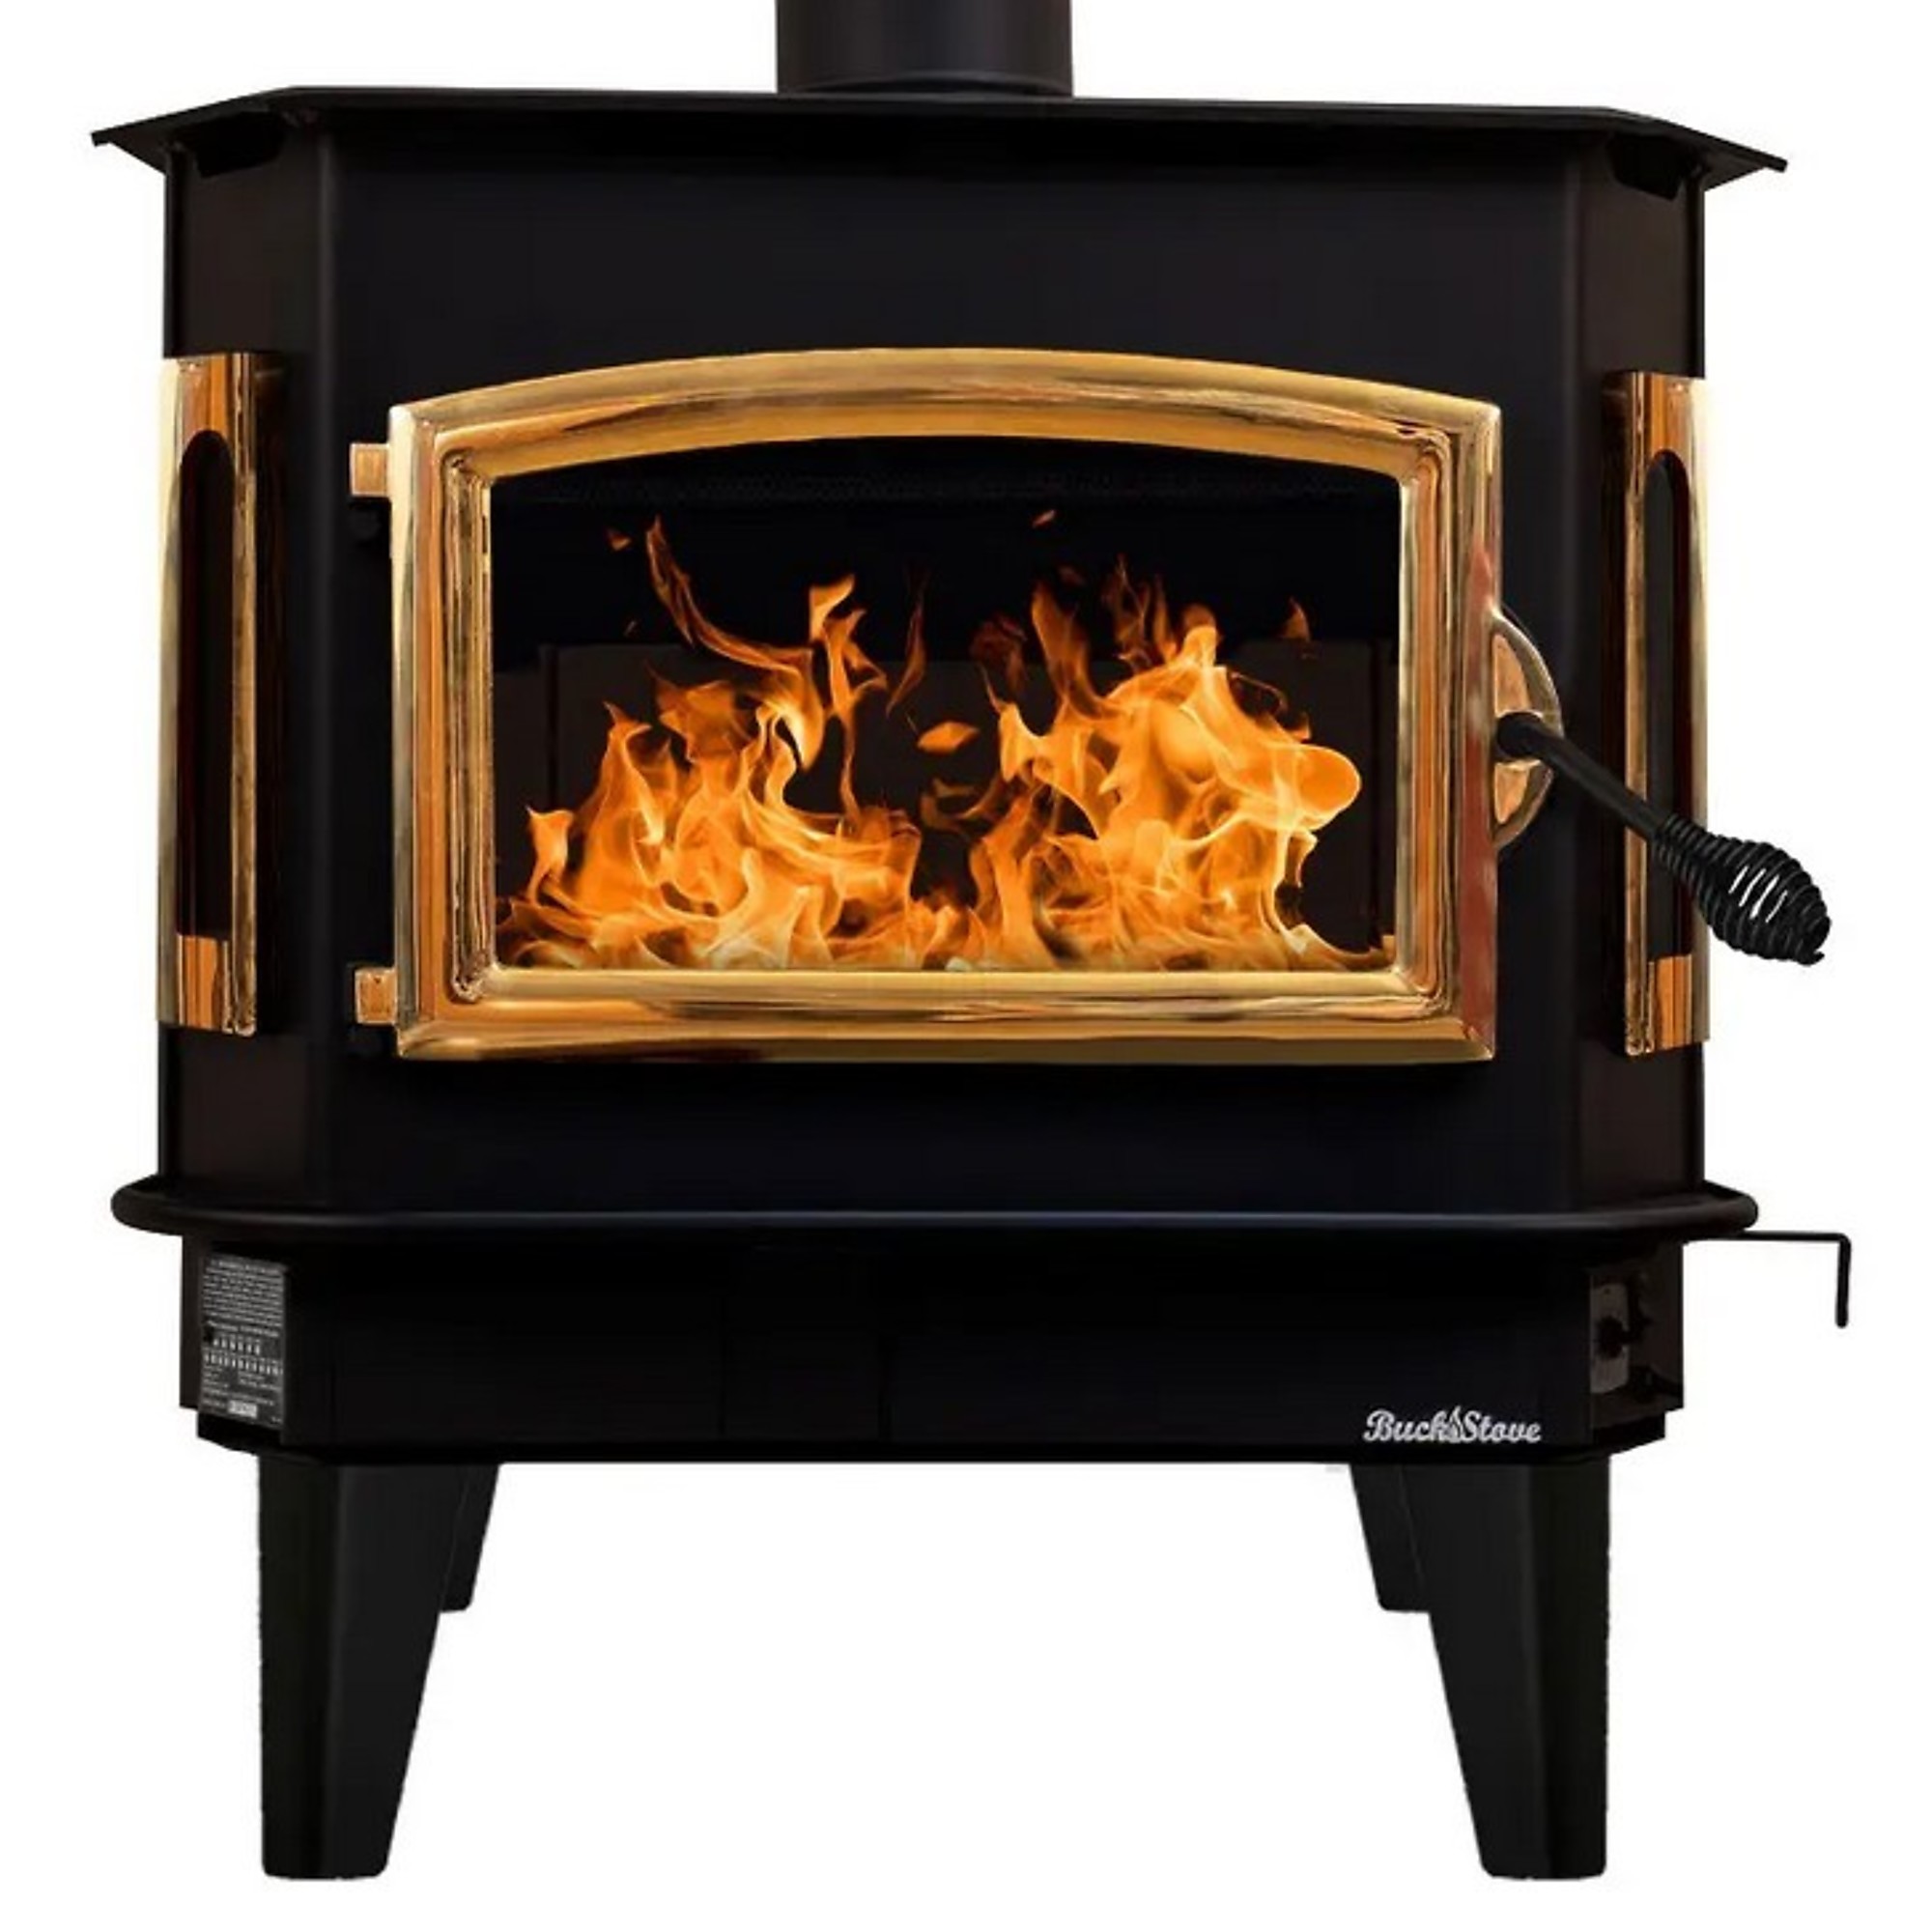 Buck, Wood Stove with Gold Door and Blower, Heat Output 59500 Btu/hour, Heating Capability 2700 ftÂ², Model FP 81GSLL